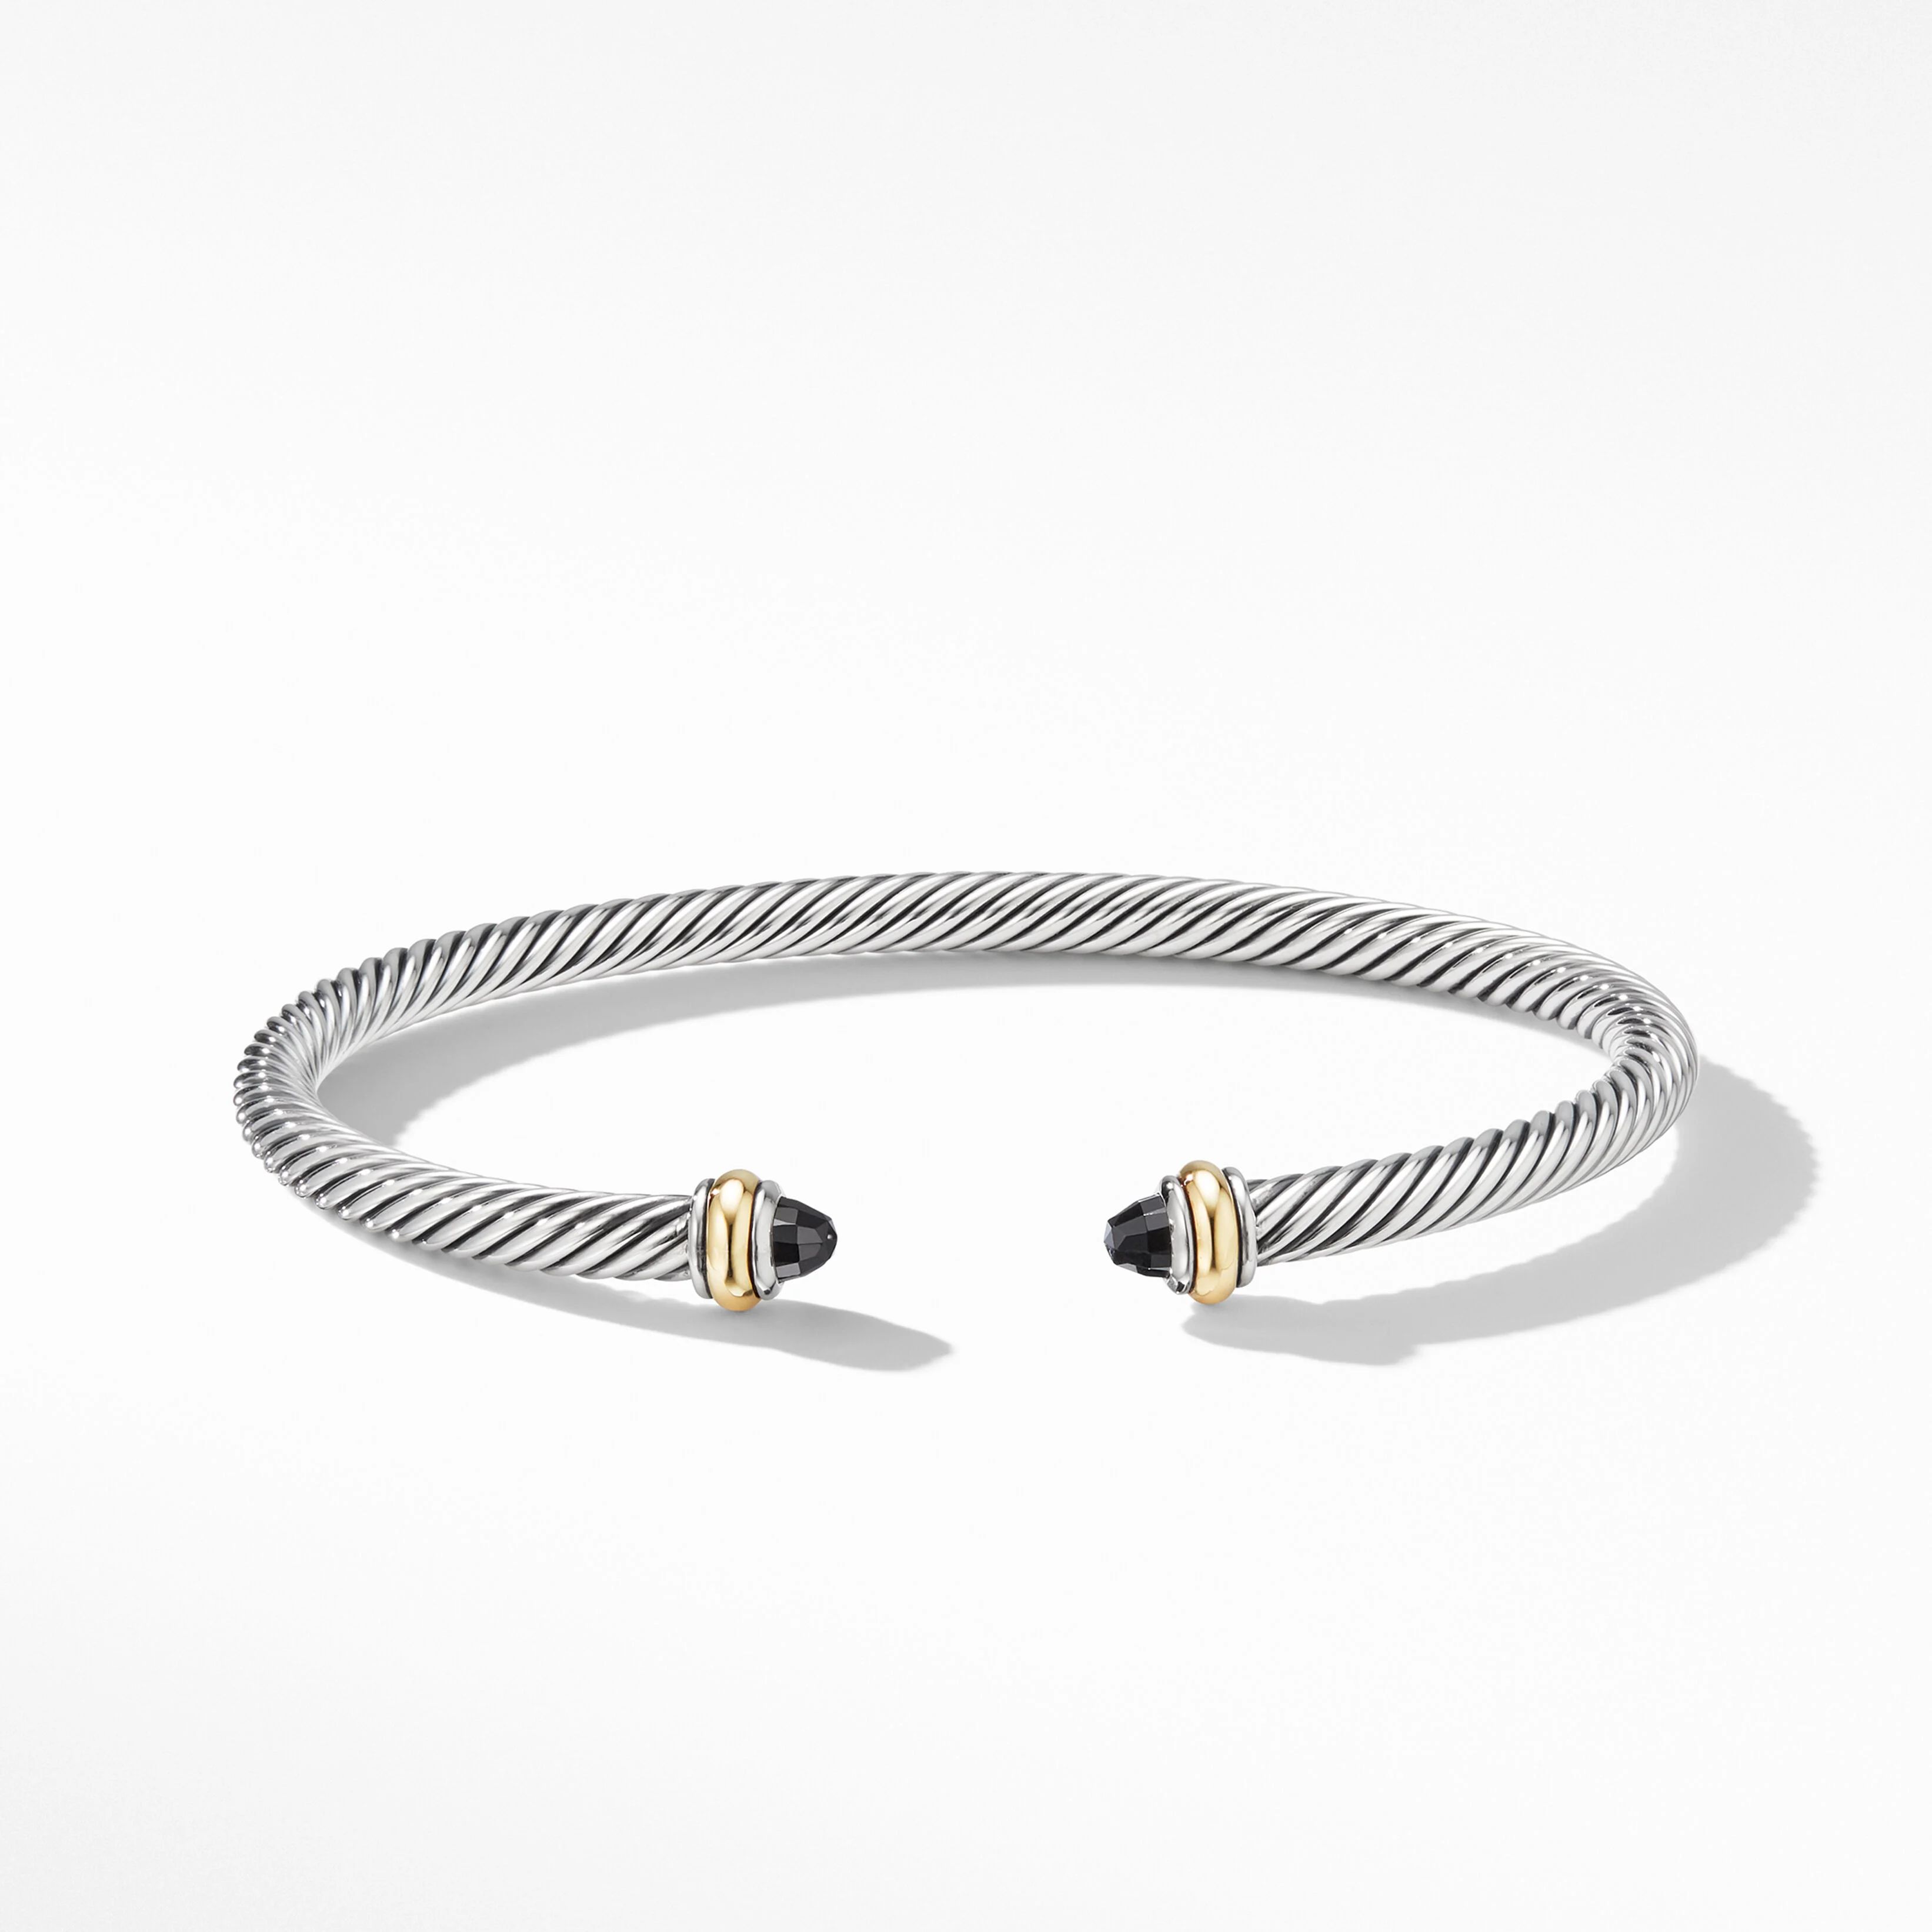 Cable Classics Bracelet in Sterling Silver with Black Onyx and 18K Yellow Gold | David Yurman